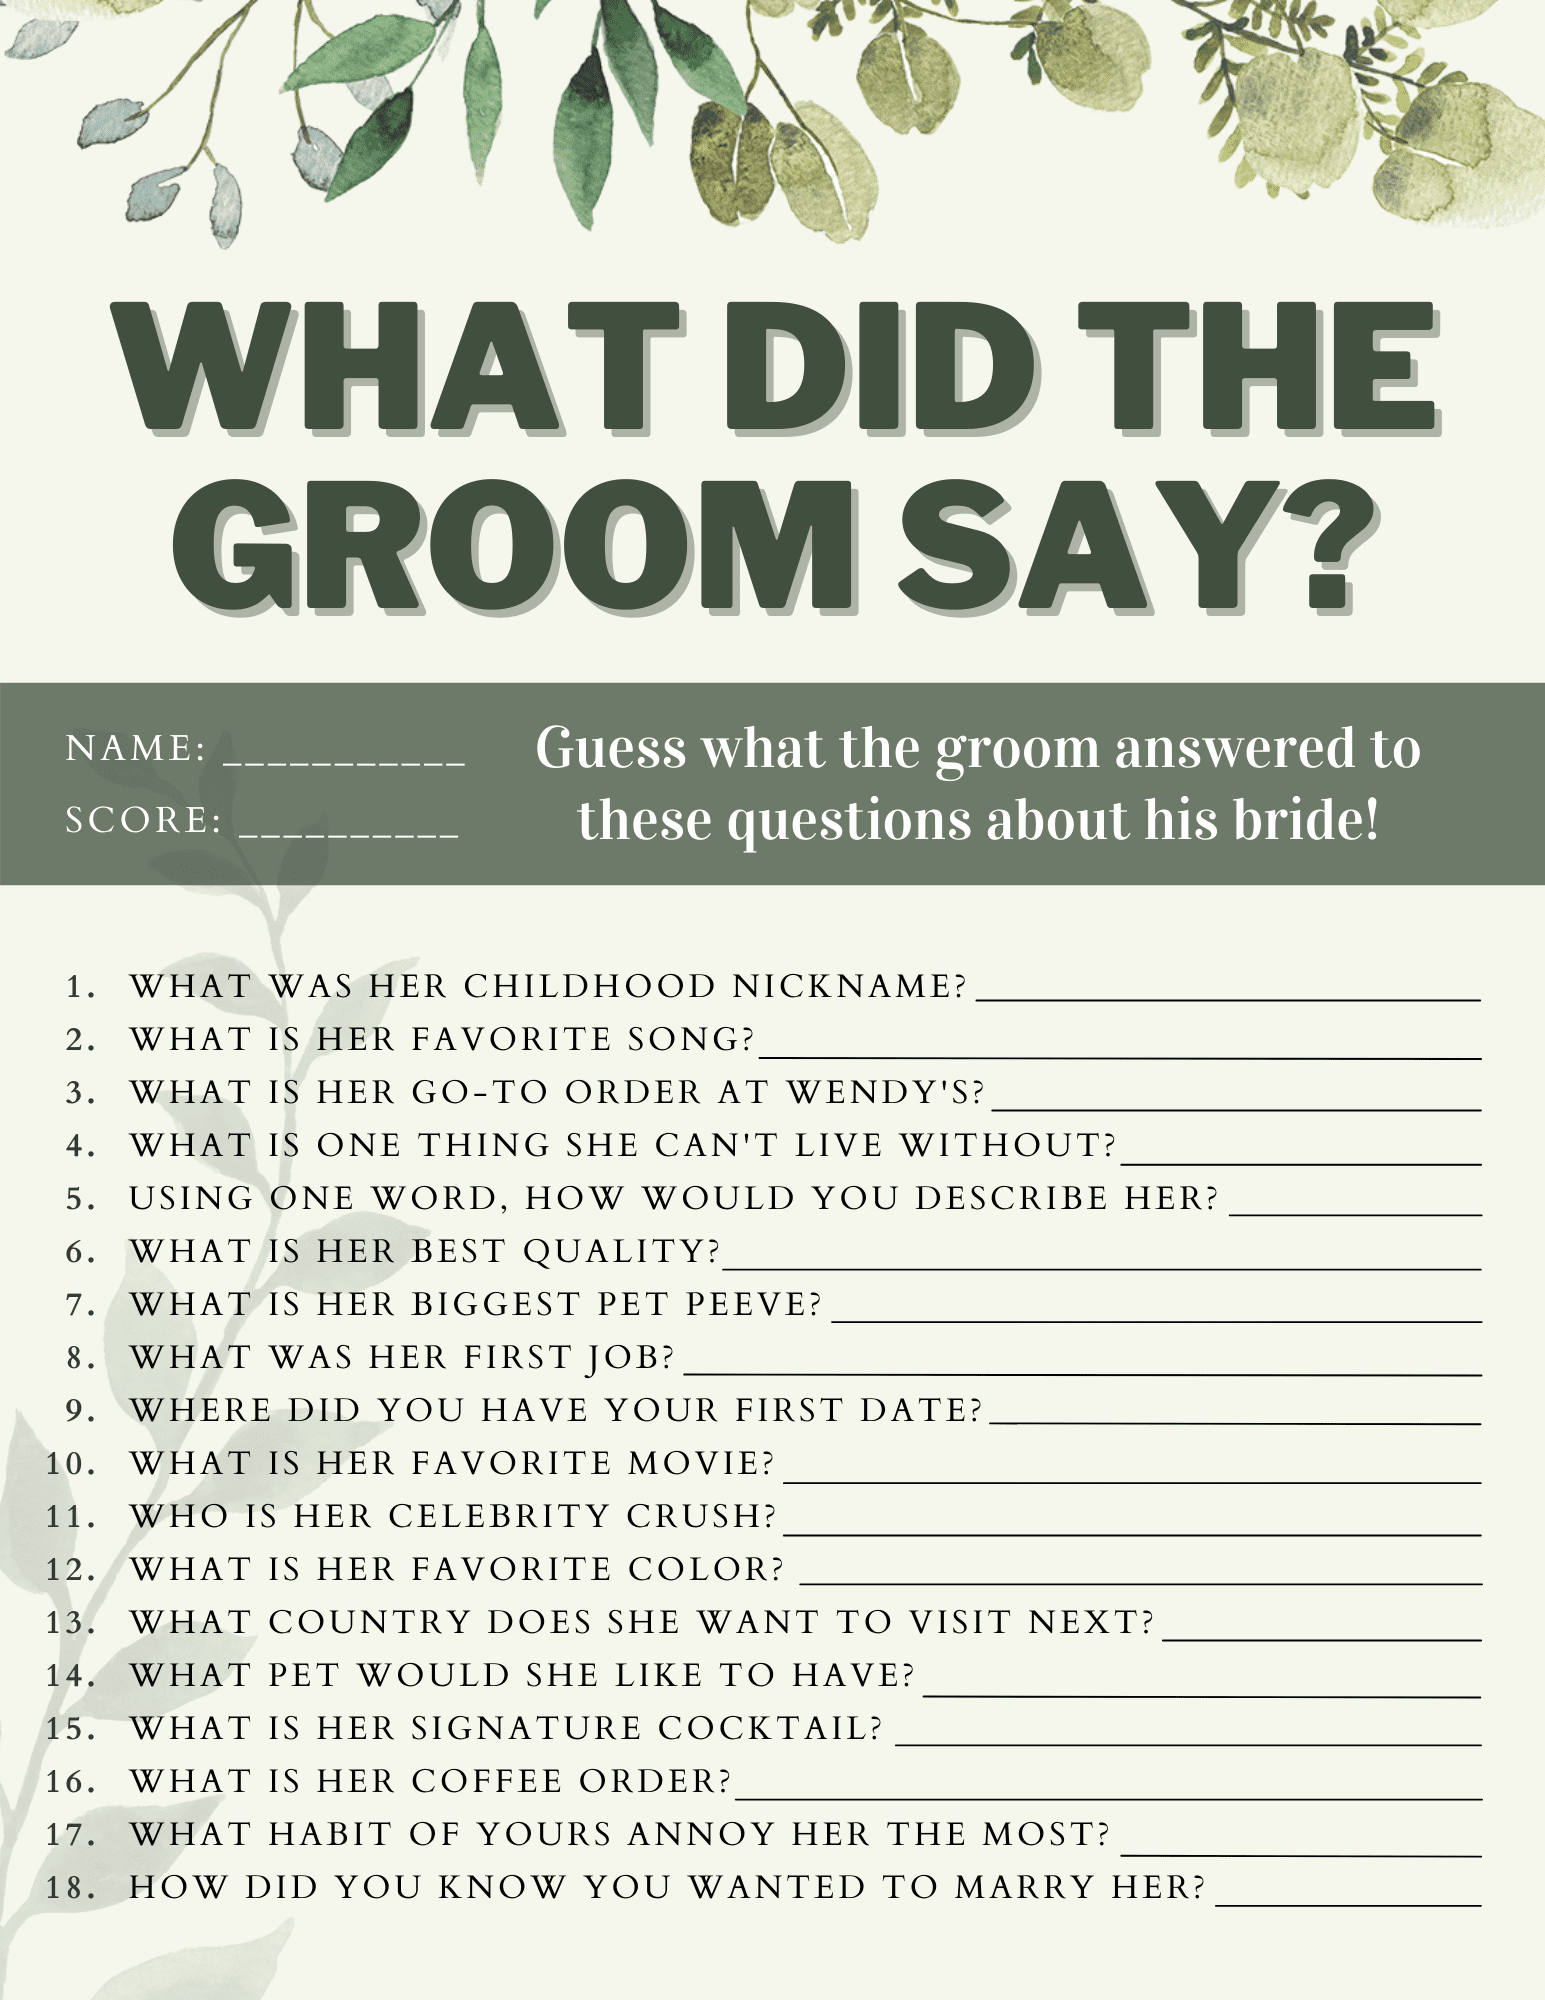 What did the Groom Say 2